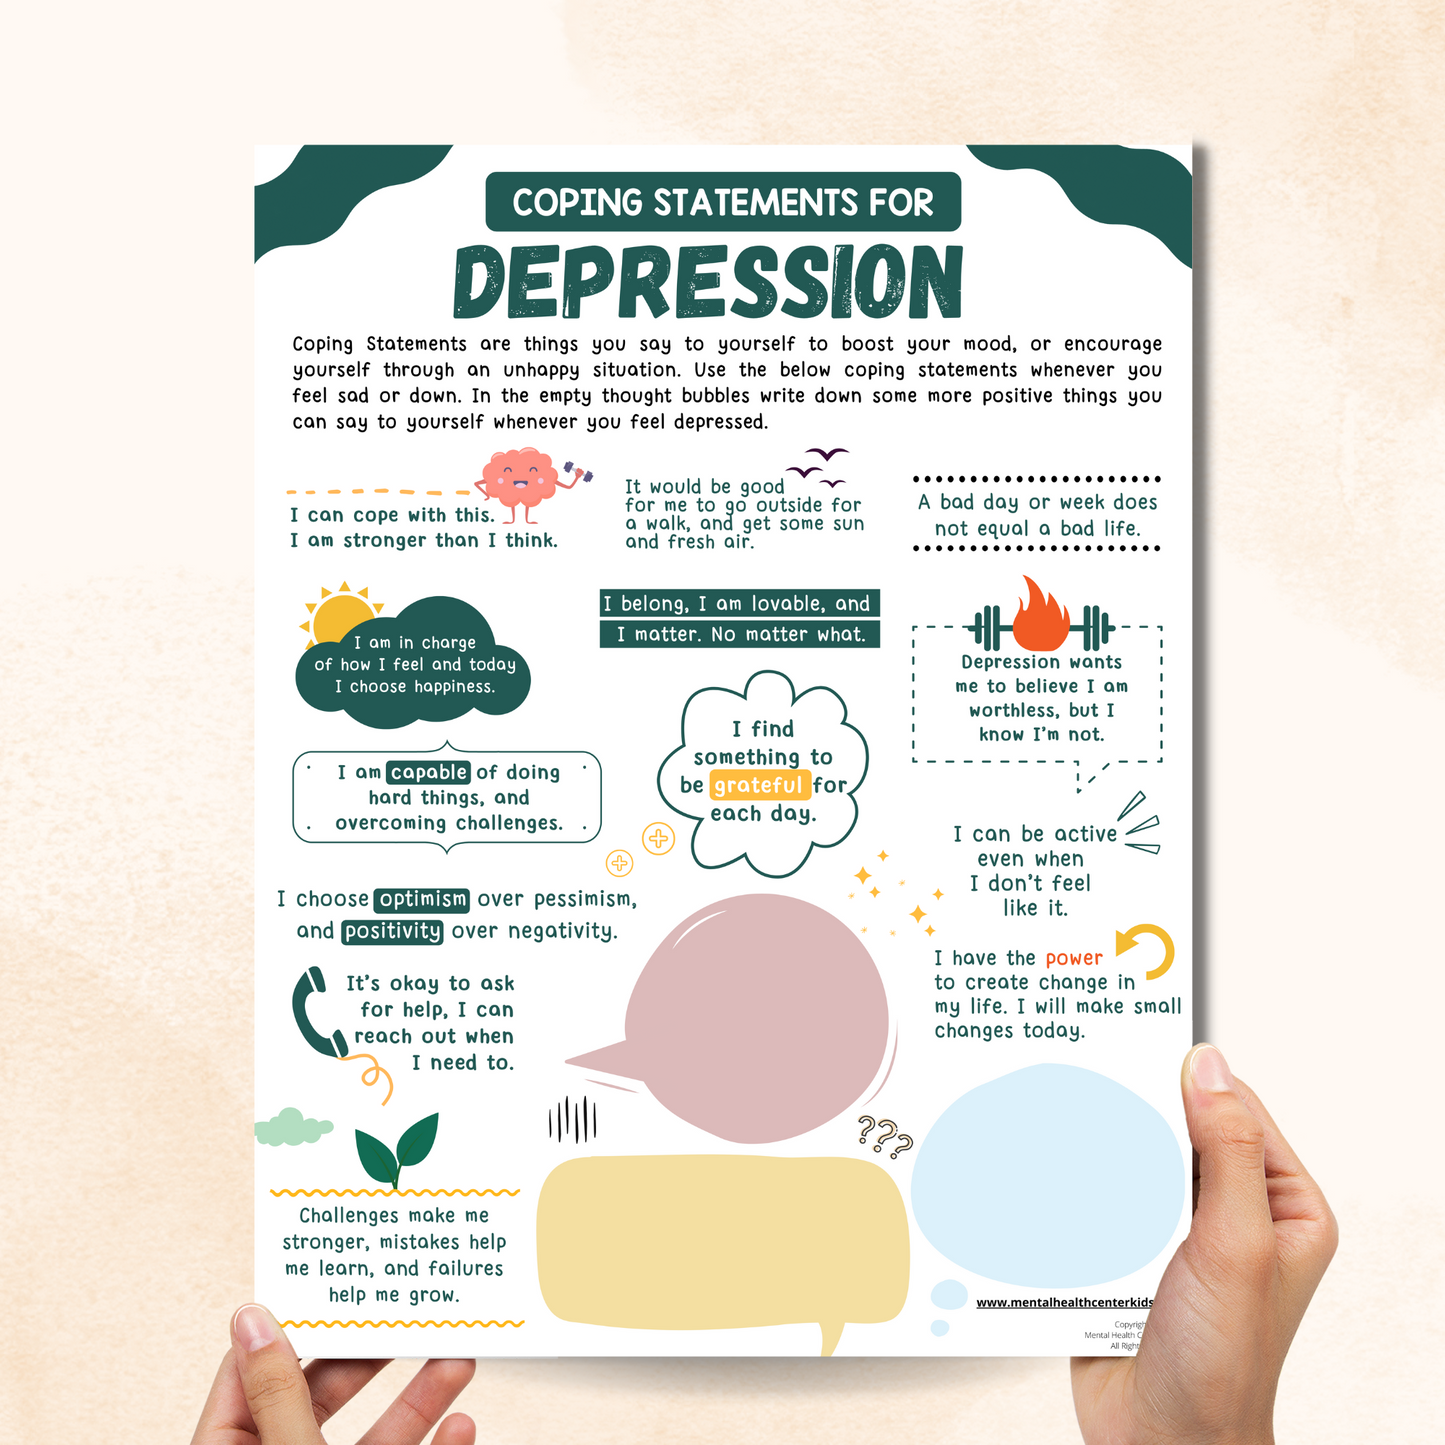 Coping Statements for Depression